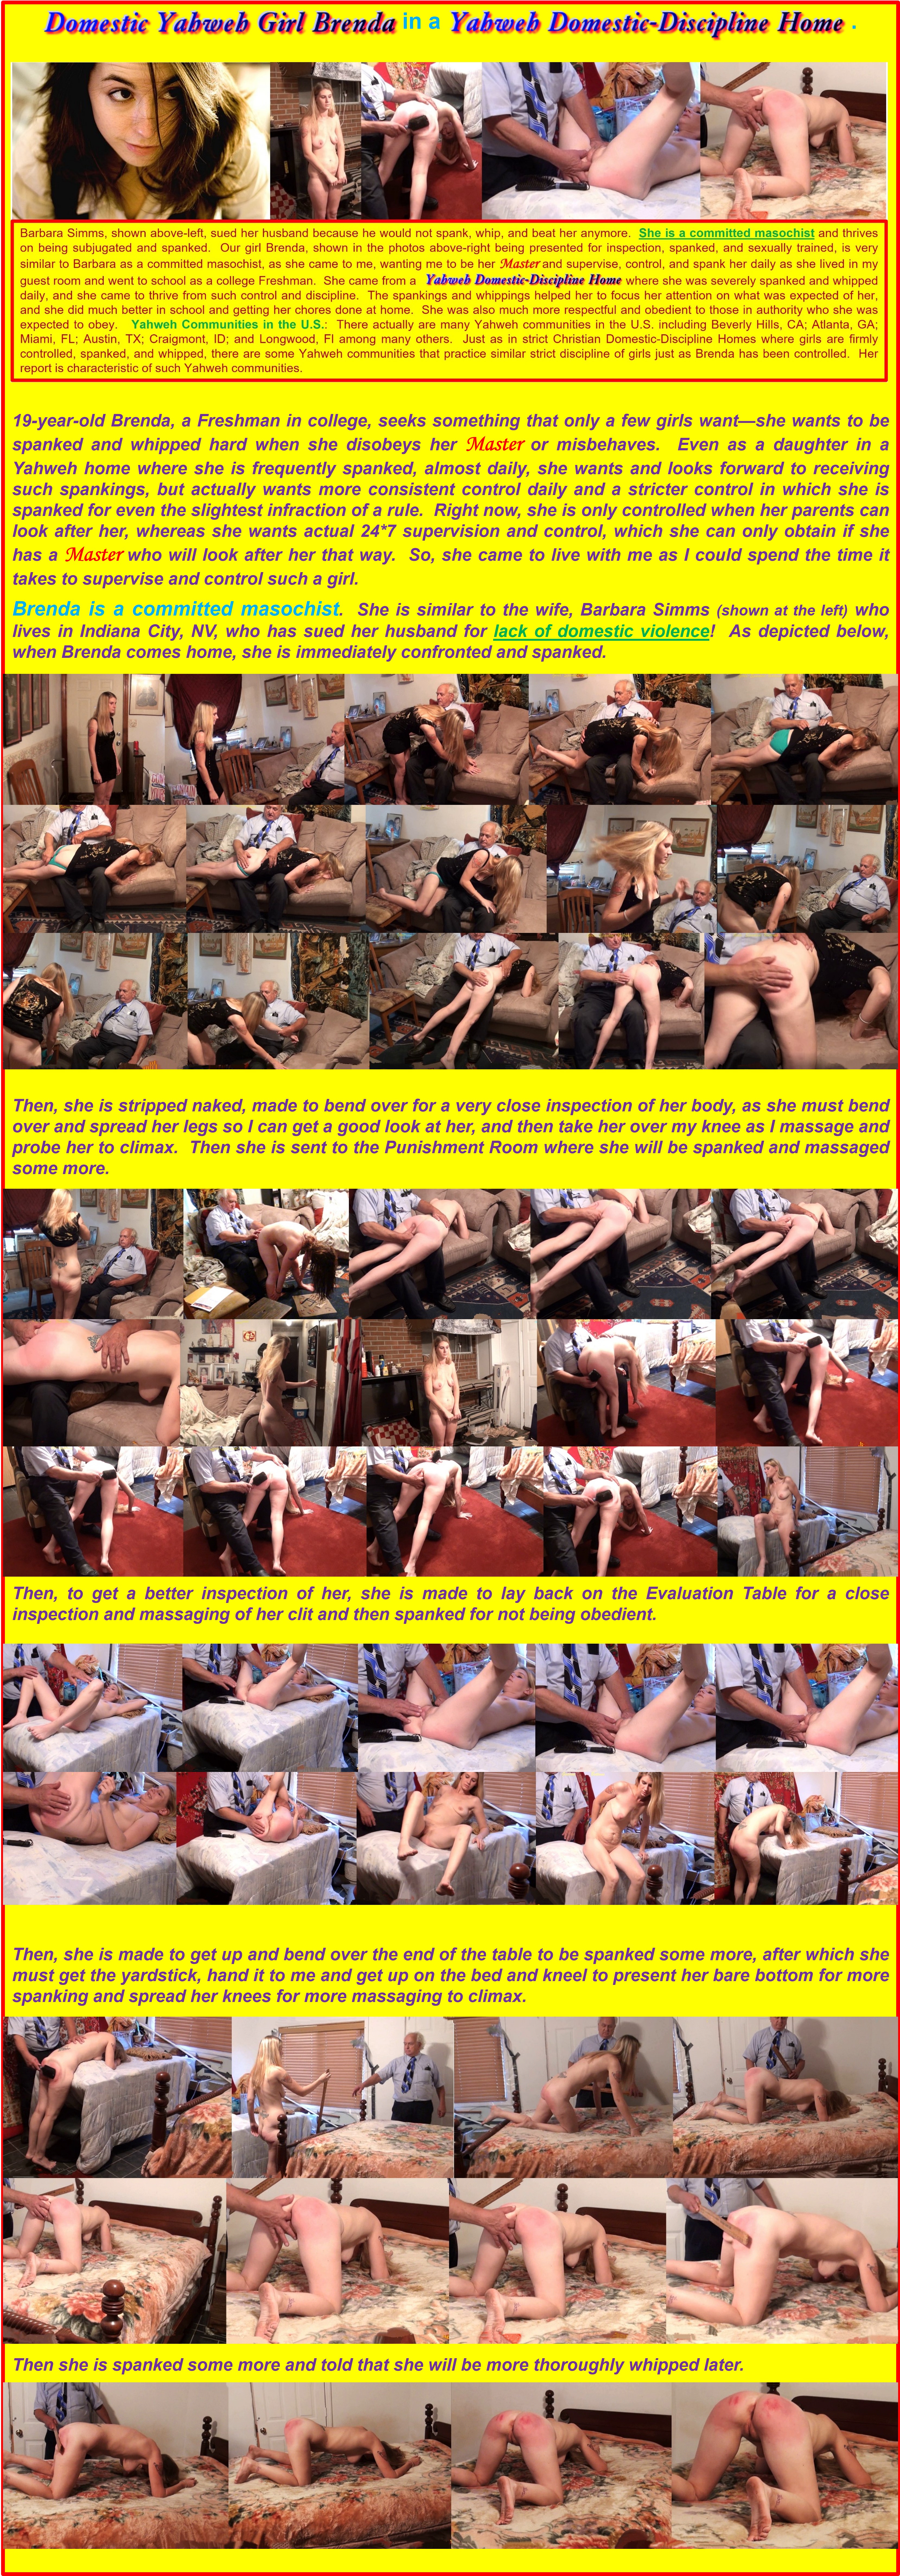 Girls-Spanked-Bottoms The Burning-Bottoms and Crying-Girls Site Page 3